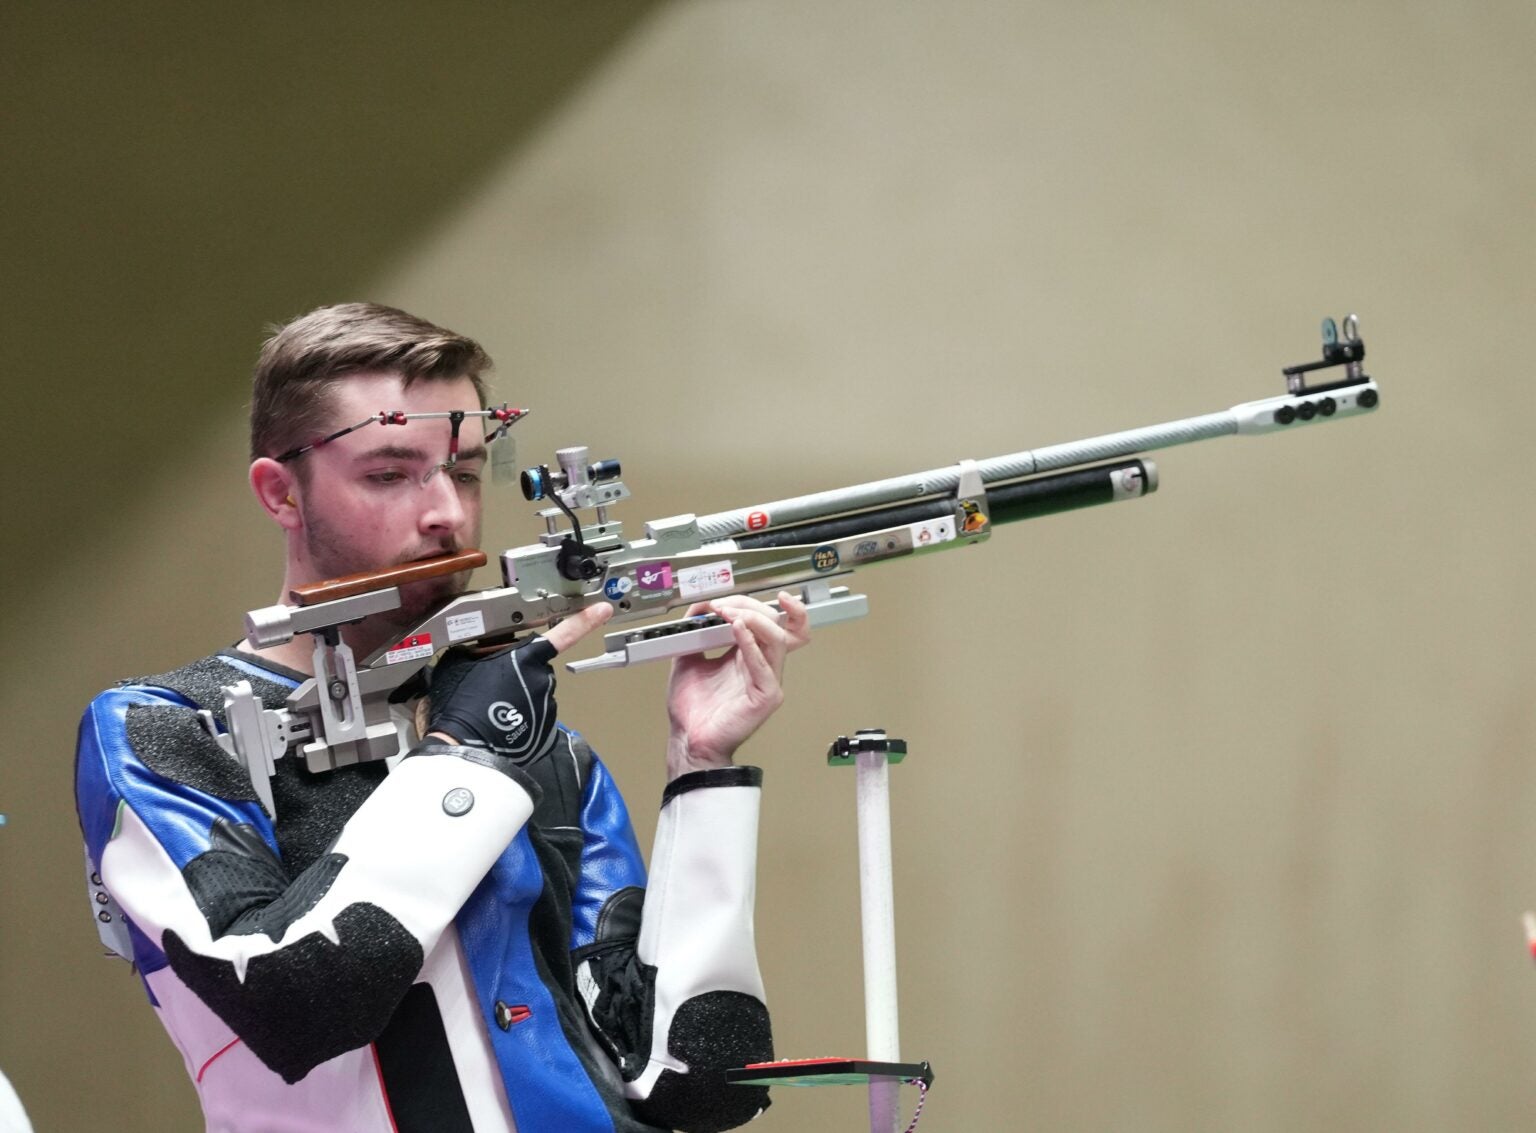 New Olympic Air Rifles Are Straight Out of Science Fiction | Field & Stream